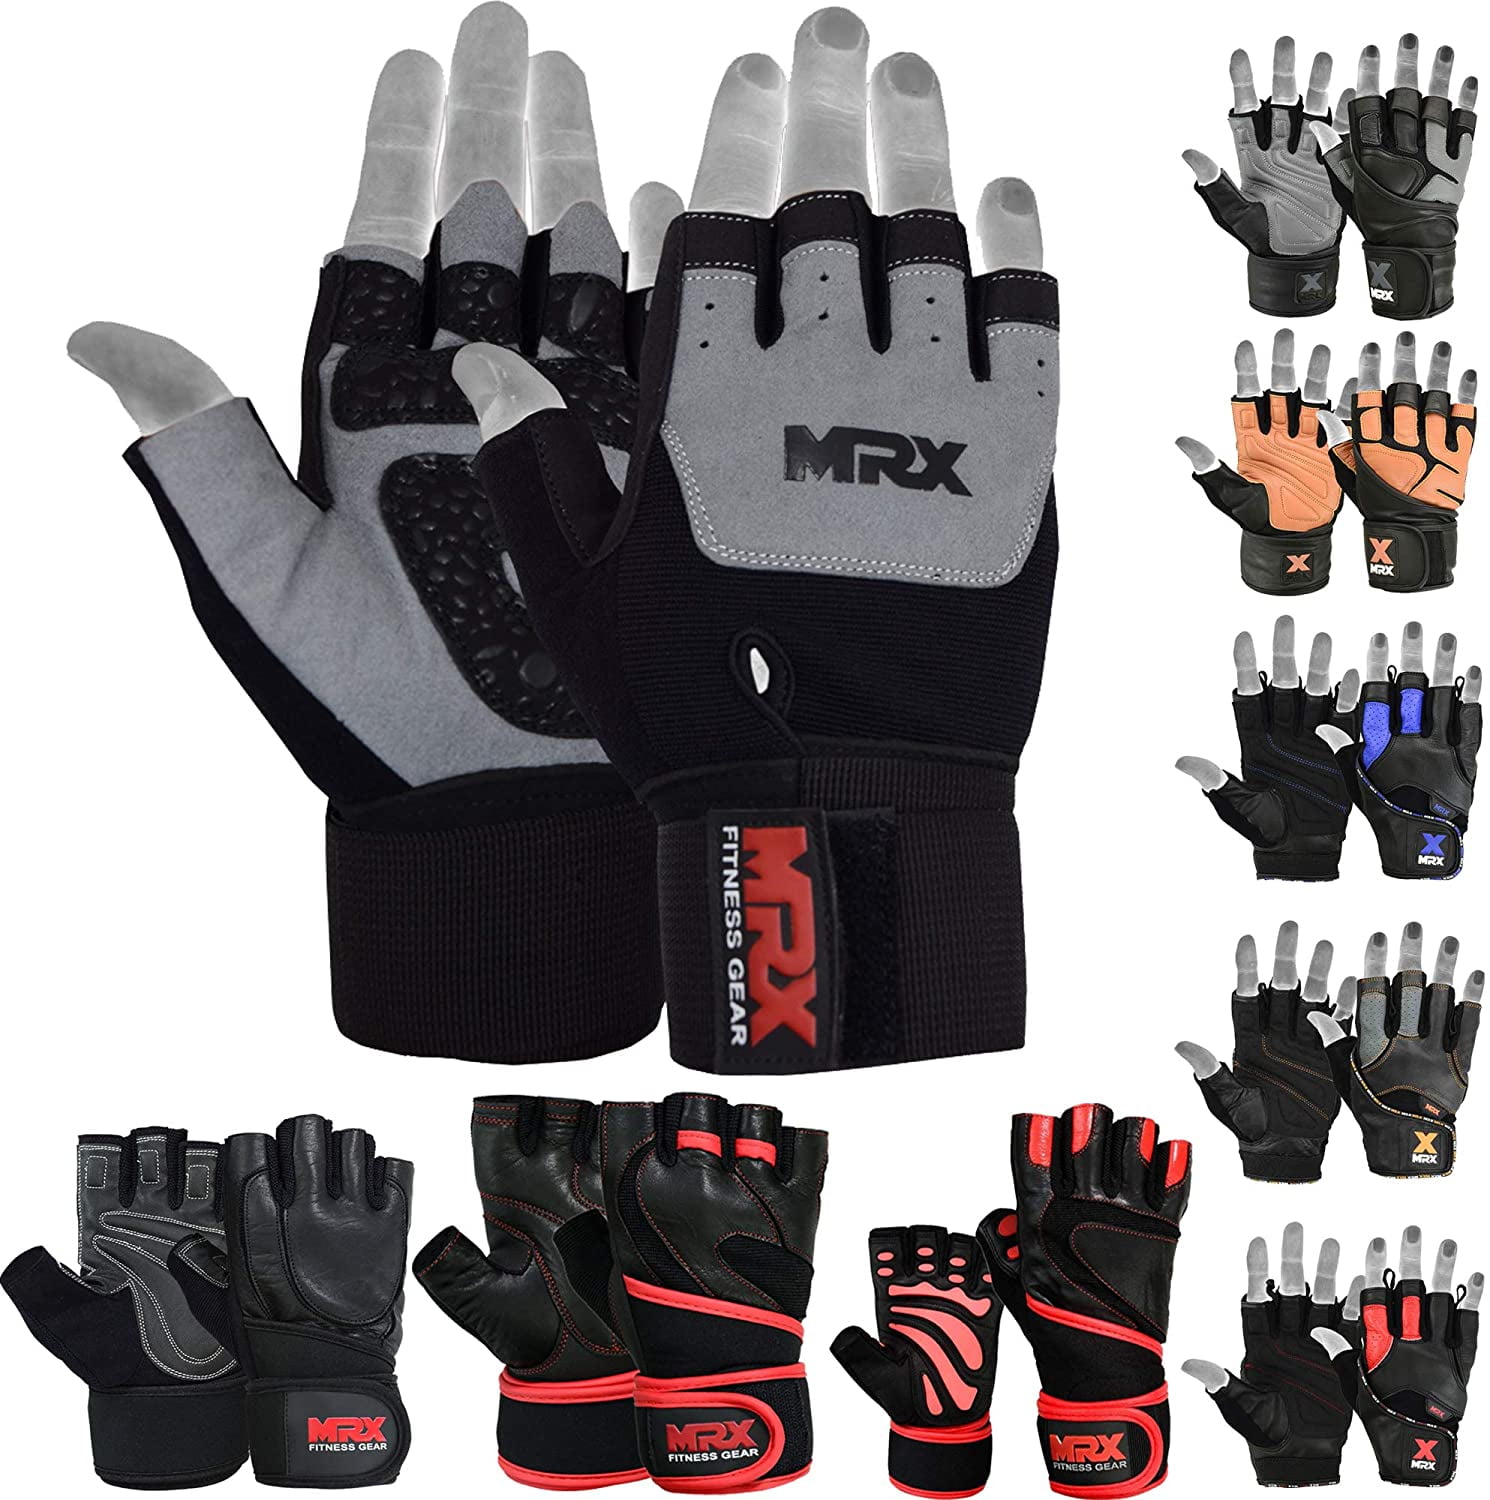 MRX Weight Lifting Gloves Gym Training Bodybuilding Fitness Powerlifting Workout Weightlifting Gloves Genuine Leather for Men & Women 